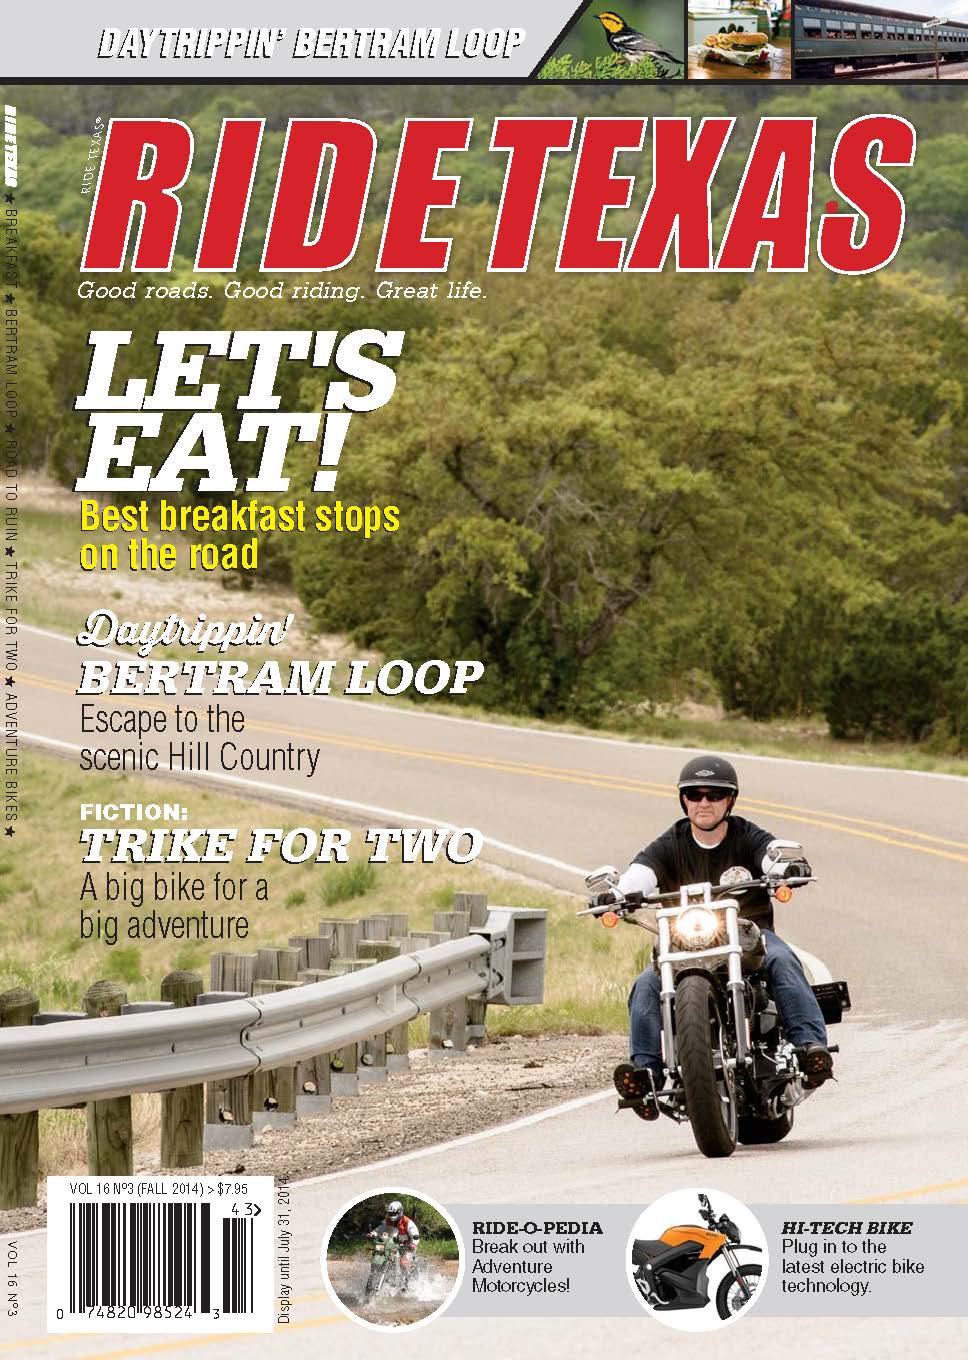 RIDE TEXAS® Volume 16 Issue 3: Best breakfast stops on the road, Daytrippin' Betram Loop - Escape to the scenic Hill Country, Fiction: Trike for Two, and more!